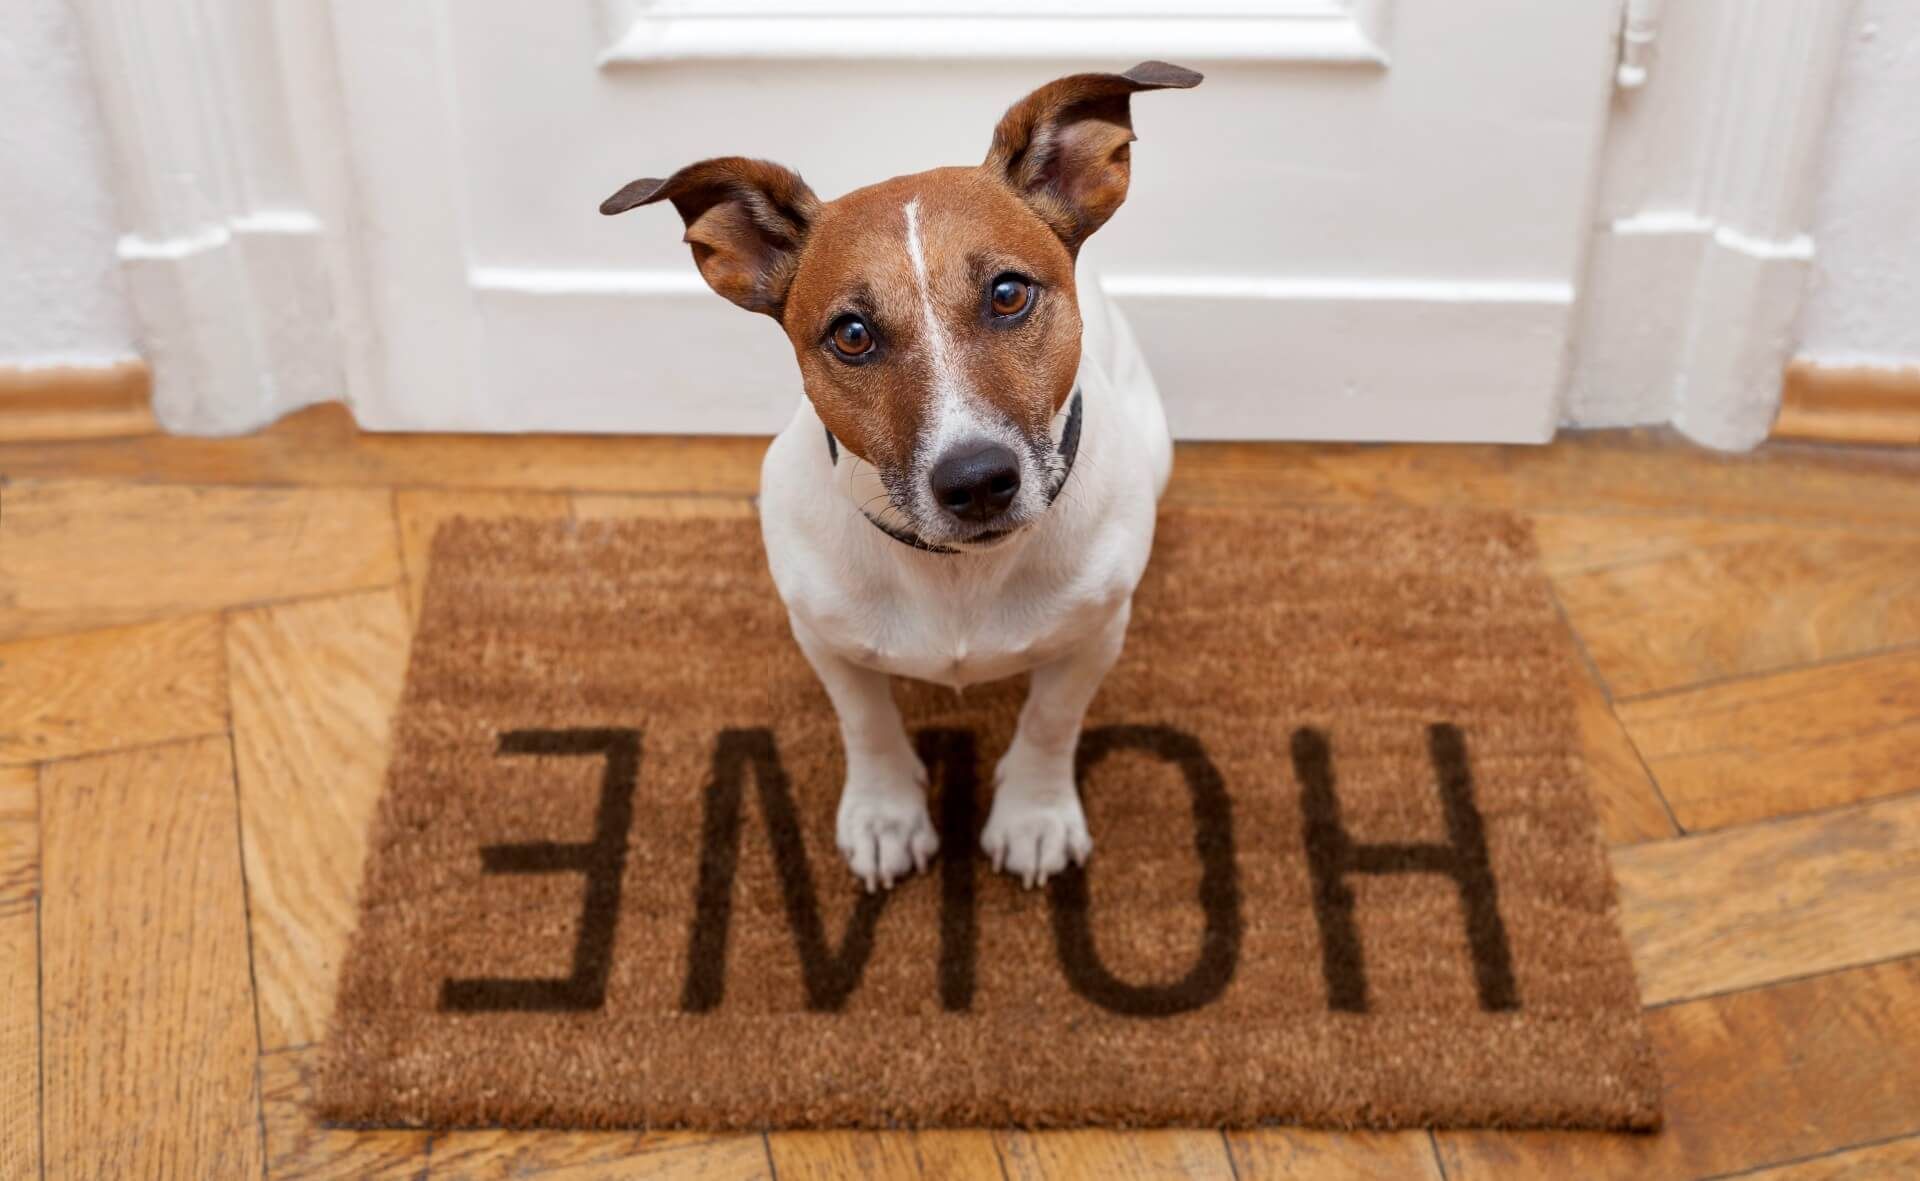 Cute dog sitting on a welcome mat